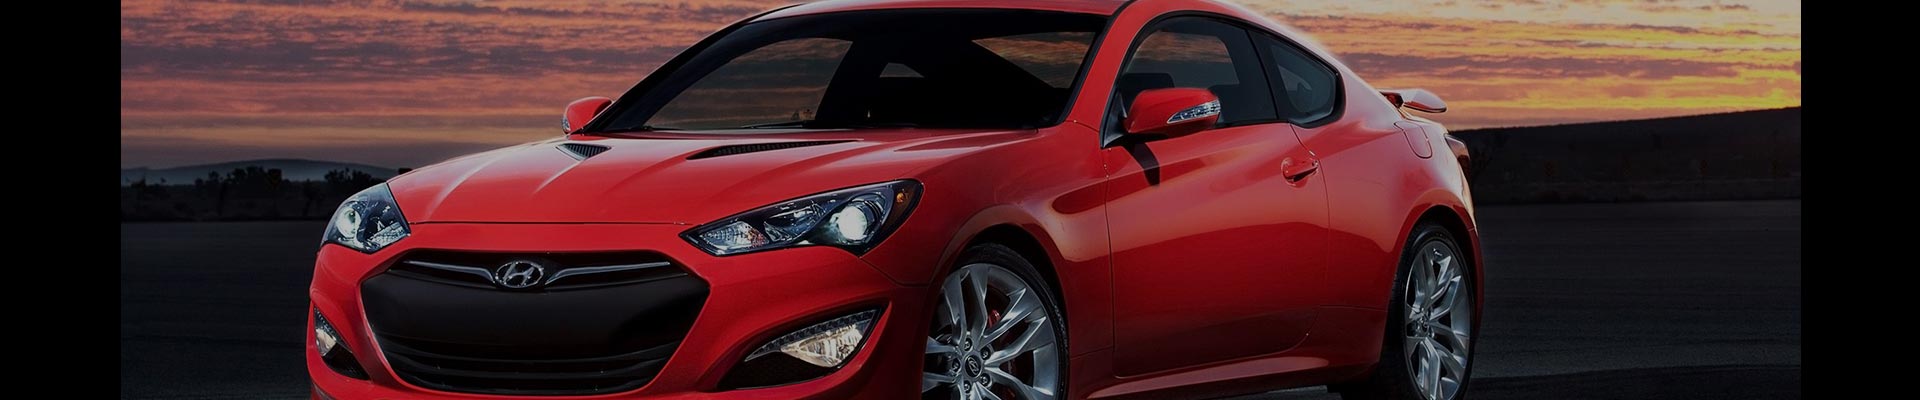 Shop Replacement and OEM 2015 Hyundai Genesis Coupe Parts with Discounted Price on the Net